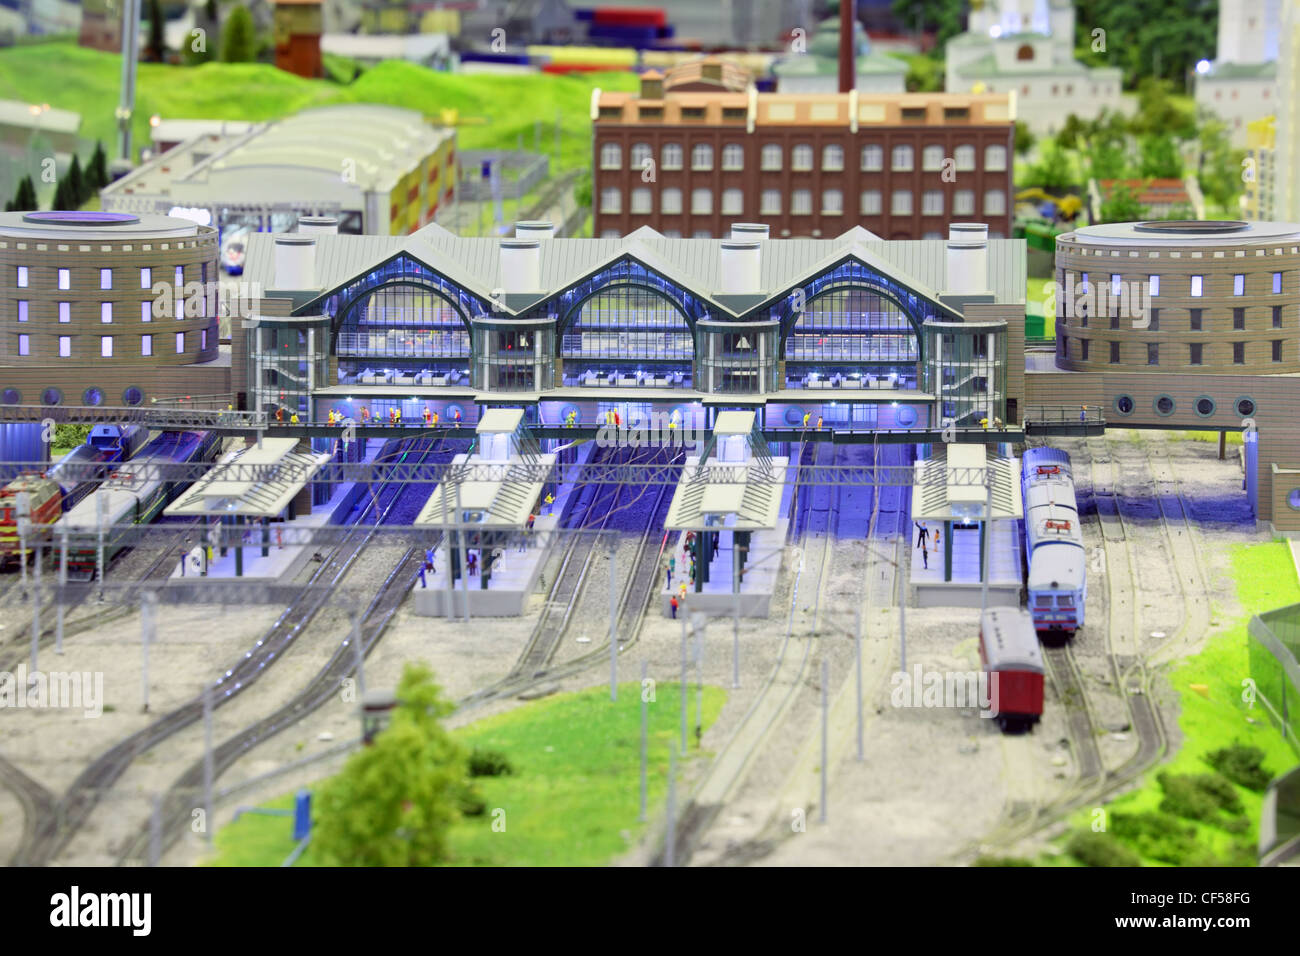 model of railroad station. railroad, trains, trees, grass, humans and buildings. focus on building in center of image. Stock Photo